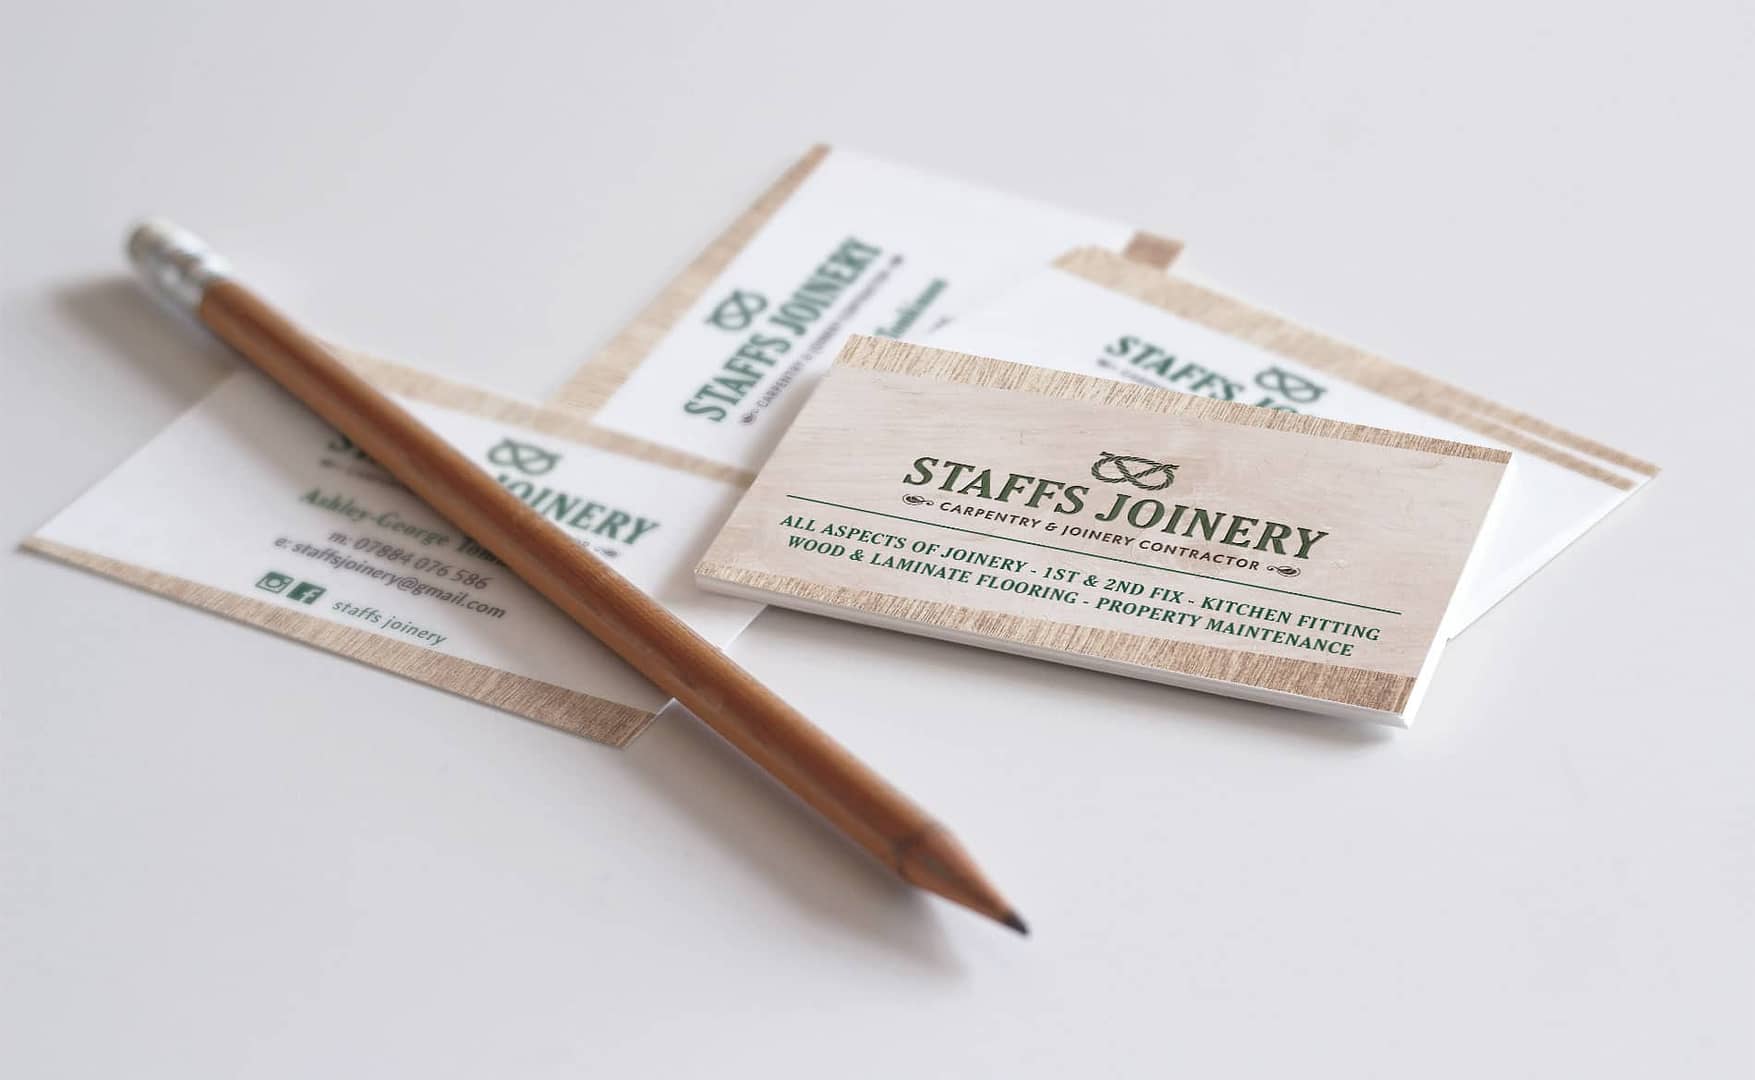 Graphic Design and Branding Services Staffs Joinery Business Card Design